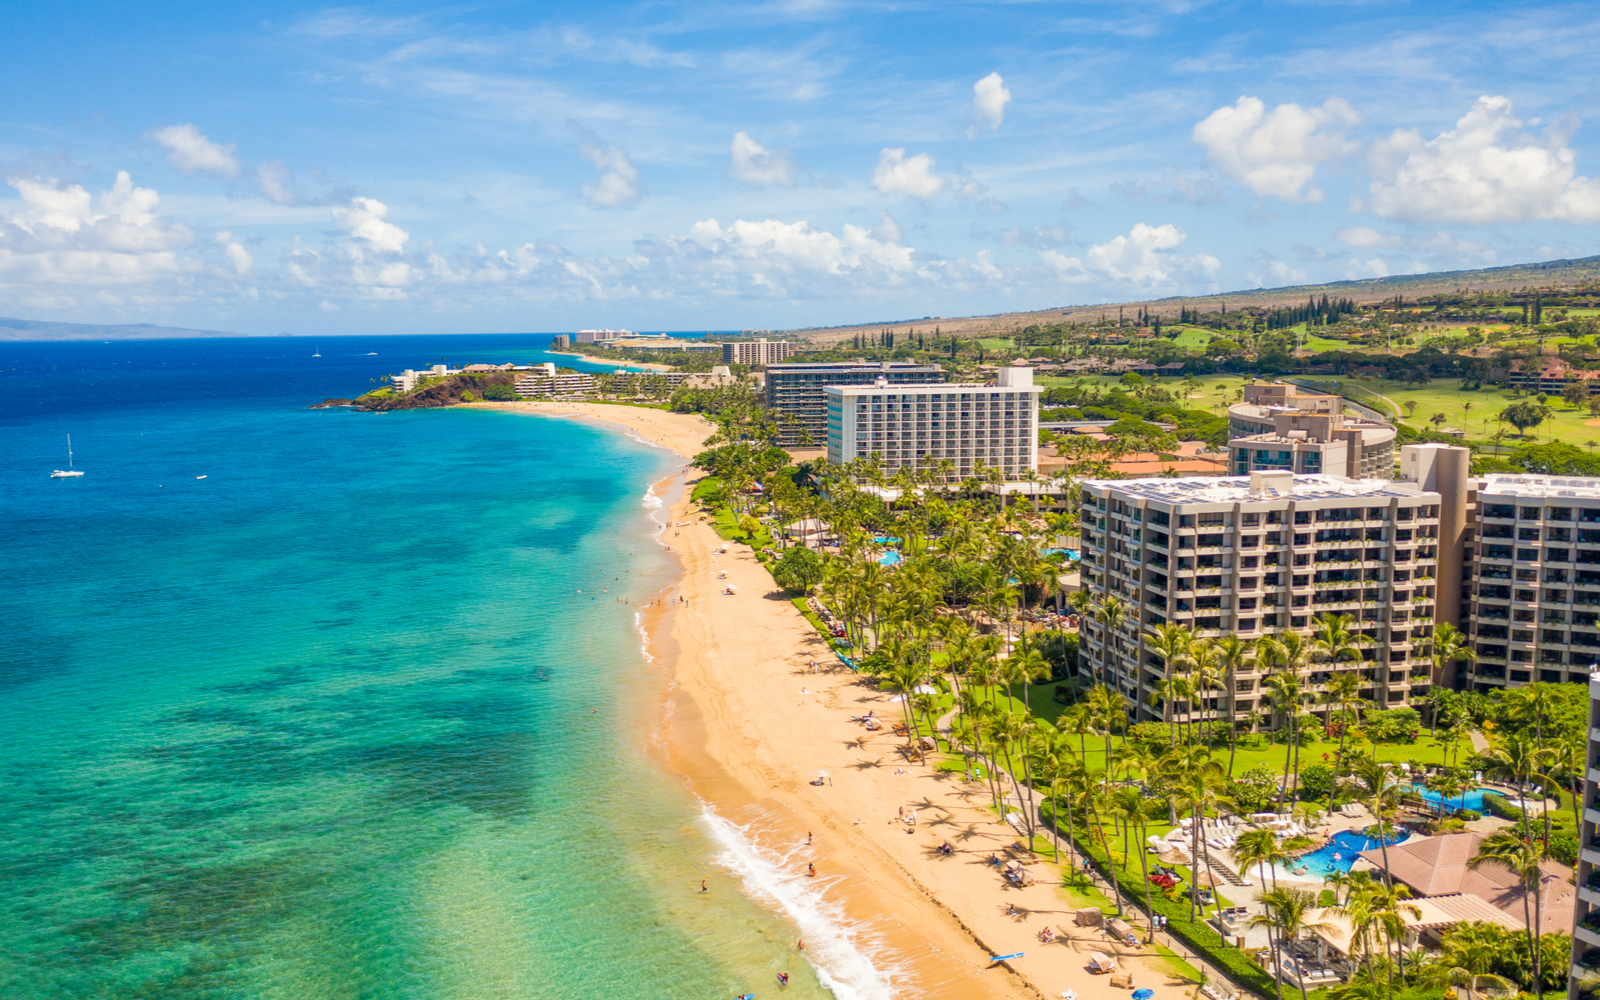 15 Best Hotels in Maui in 2022 | For All Budgets